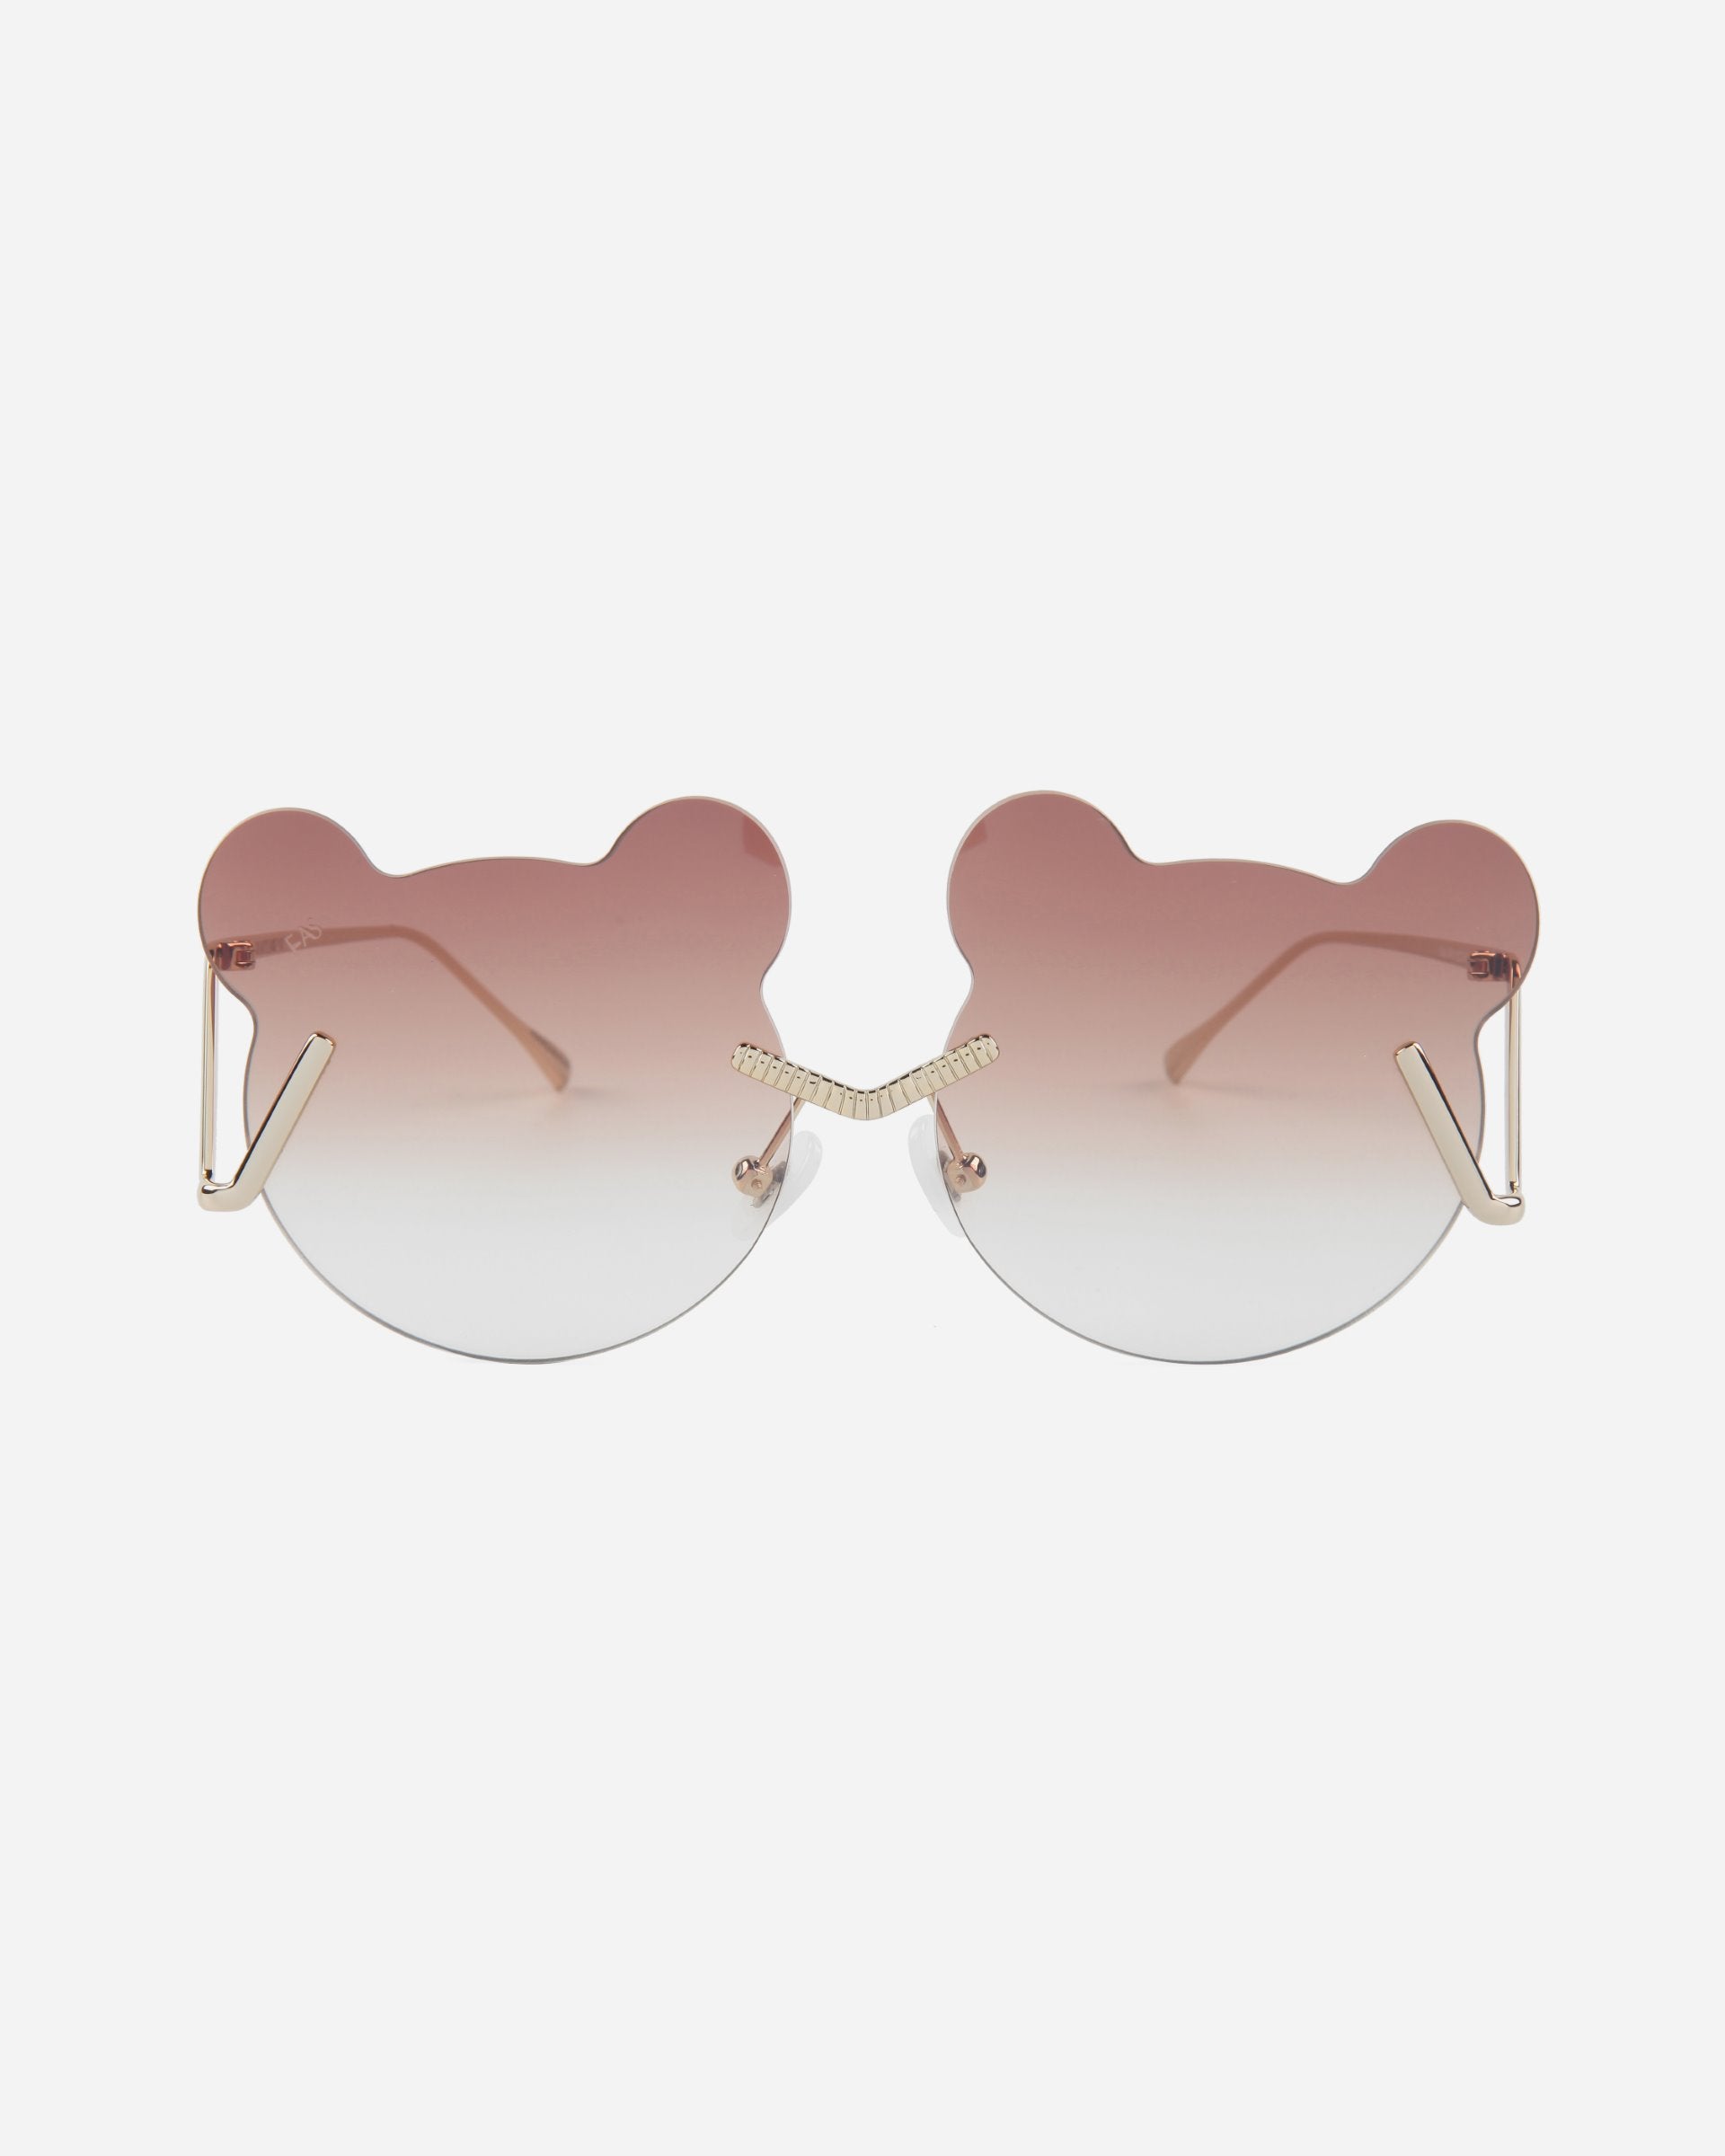 A pair of For Art&#39;s Sake® Teddy sunglasses with unique, bear-ear-shaped frames. The gradient lenses transition from a dark rose color at the top to clear at the bottom. The minimal stainless steel frames feature gold-toned temples and adjustable nosepads for added comfort and UV protection.